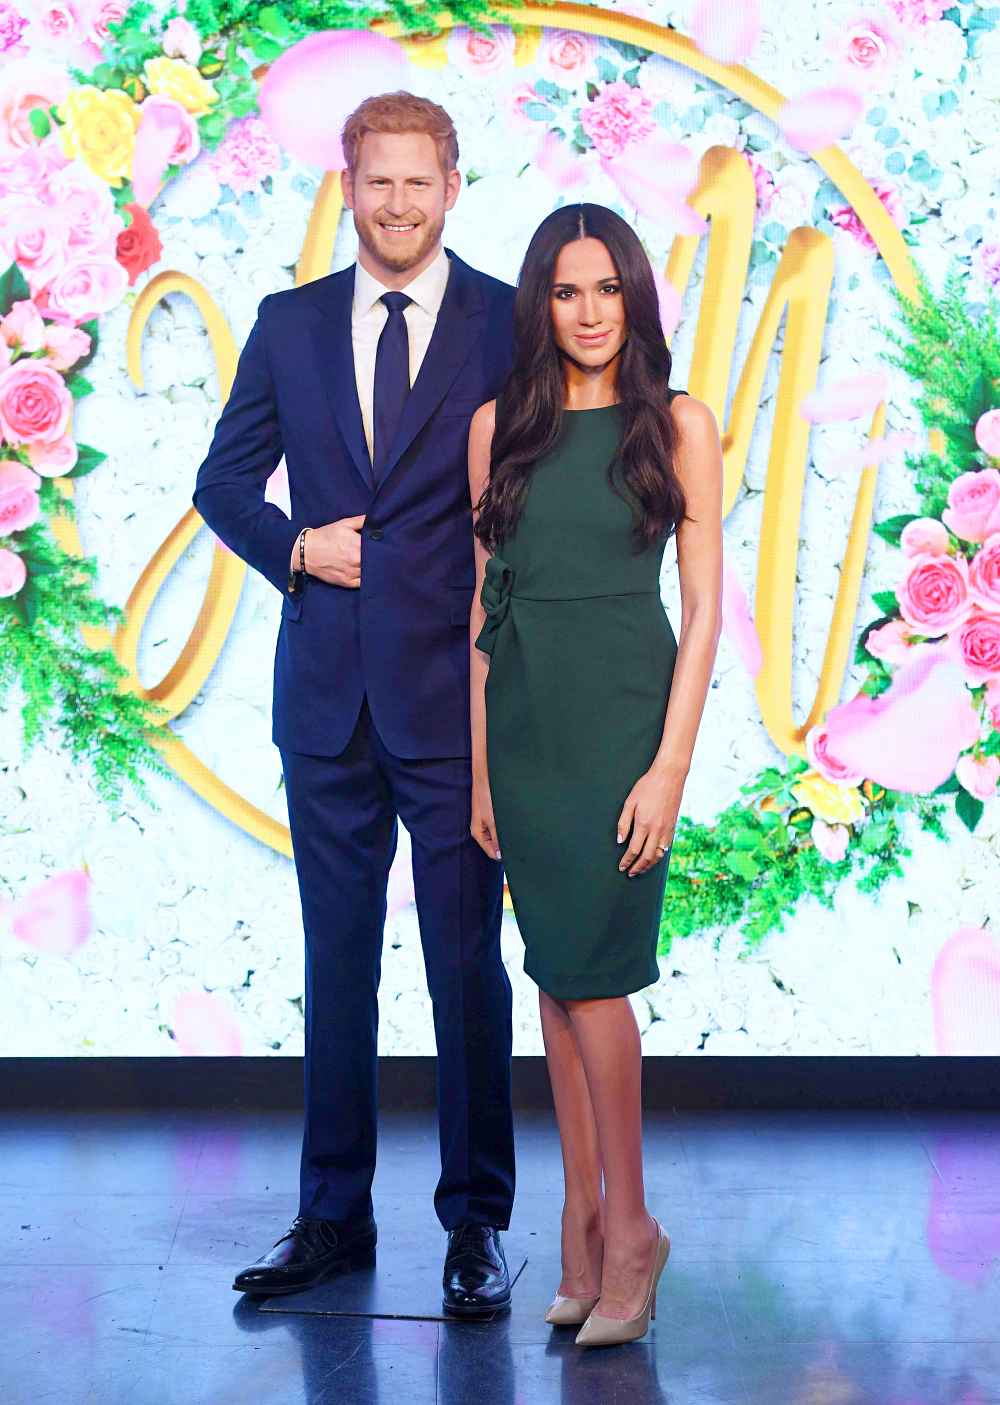 Madame Tussauds unveils a wax figure of Meghan Markle at Madame Tussauds London on May 9, 2018 ahead of her wedding to Prince Harry.